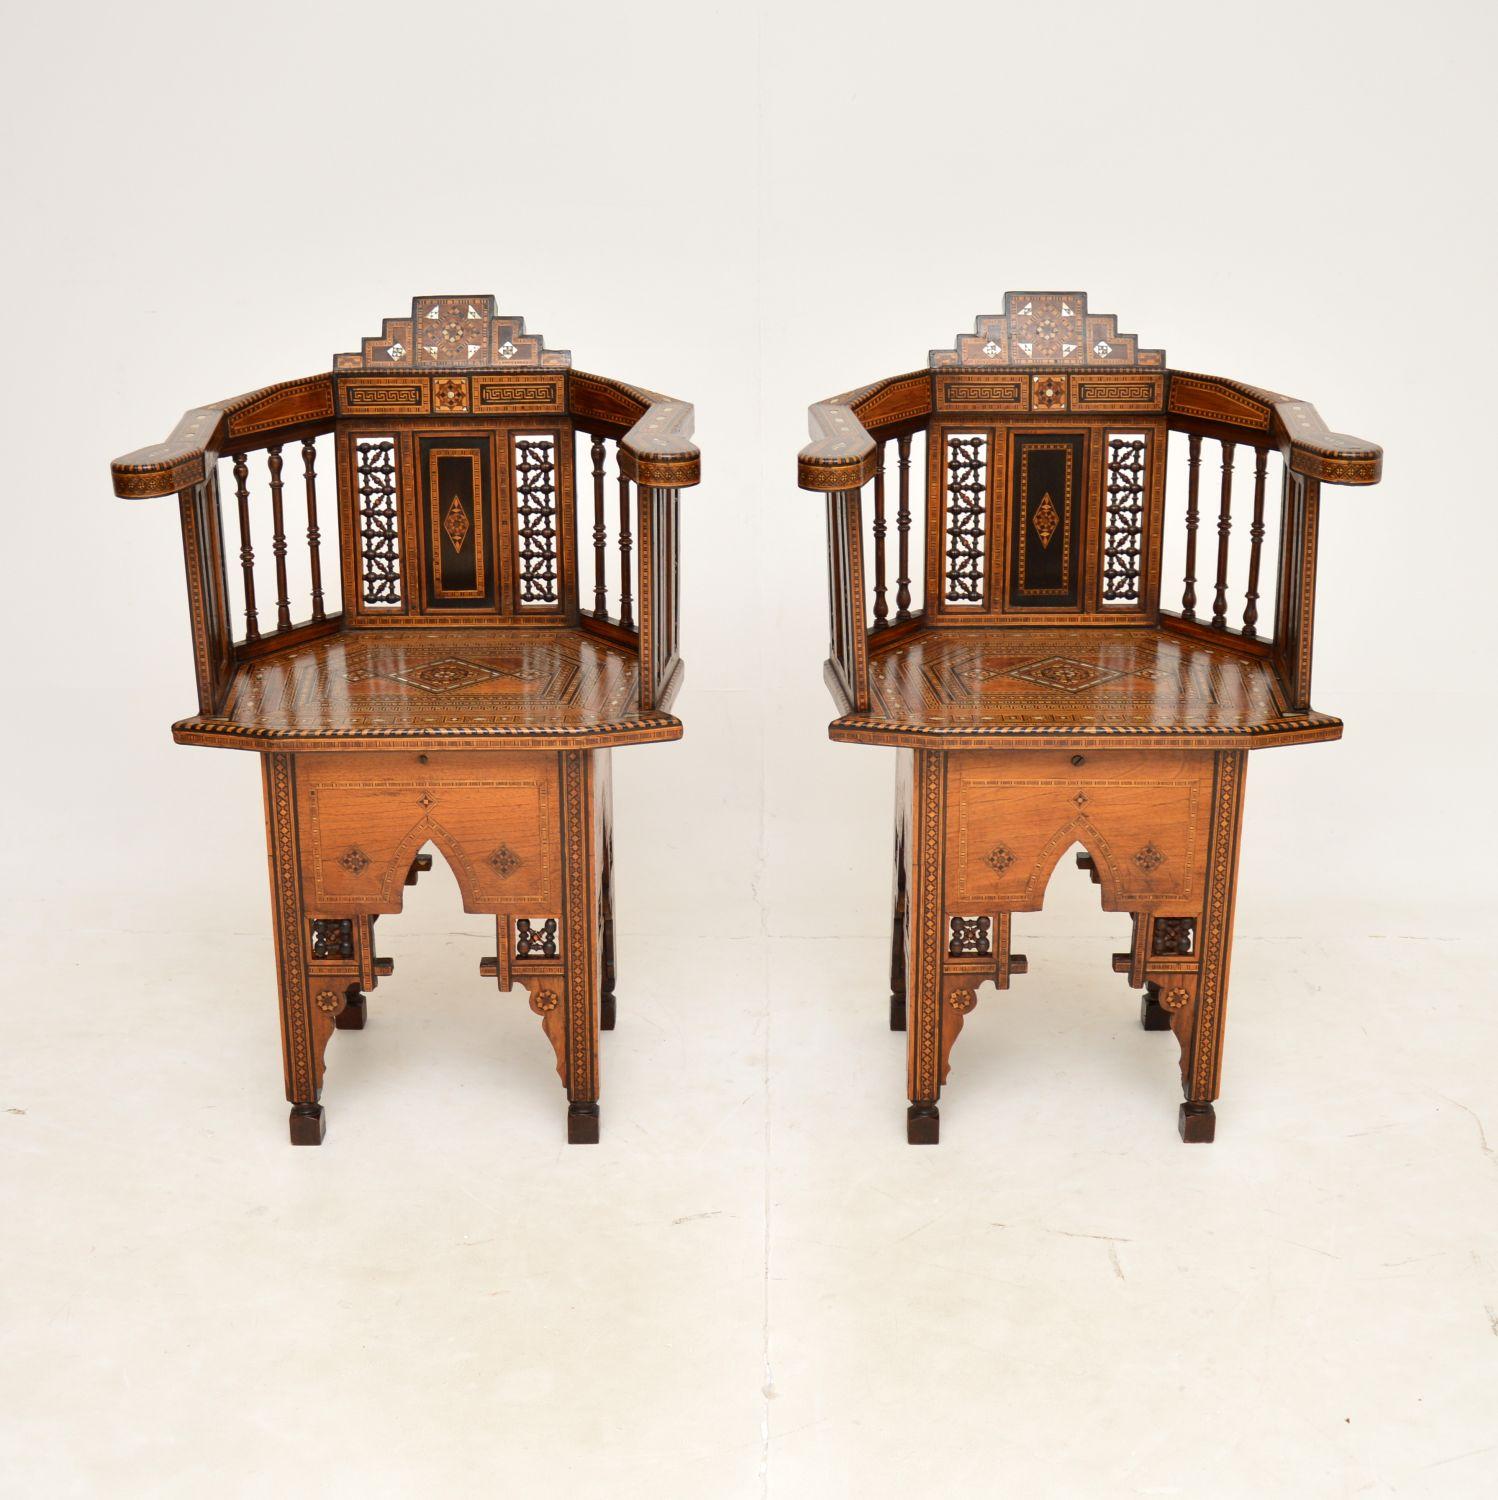 A stunning pair of antique Syrian Damascus armchairs, dating from around the 1900-1920 period.

They are of extremely high quality, with absolutely stunning inlay throughout of various woods and mother of pearl. The inlaid geometric patterns are